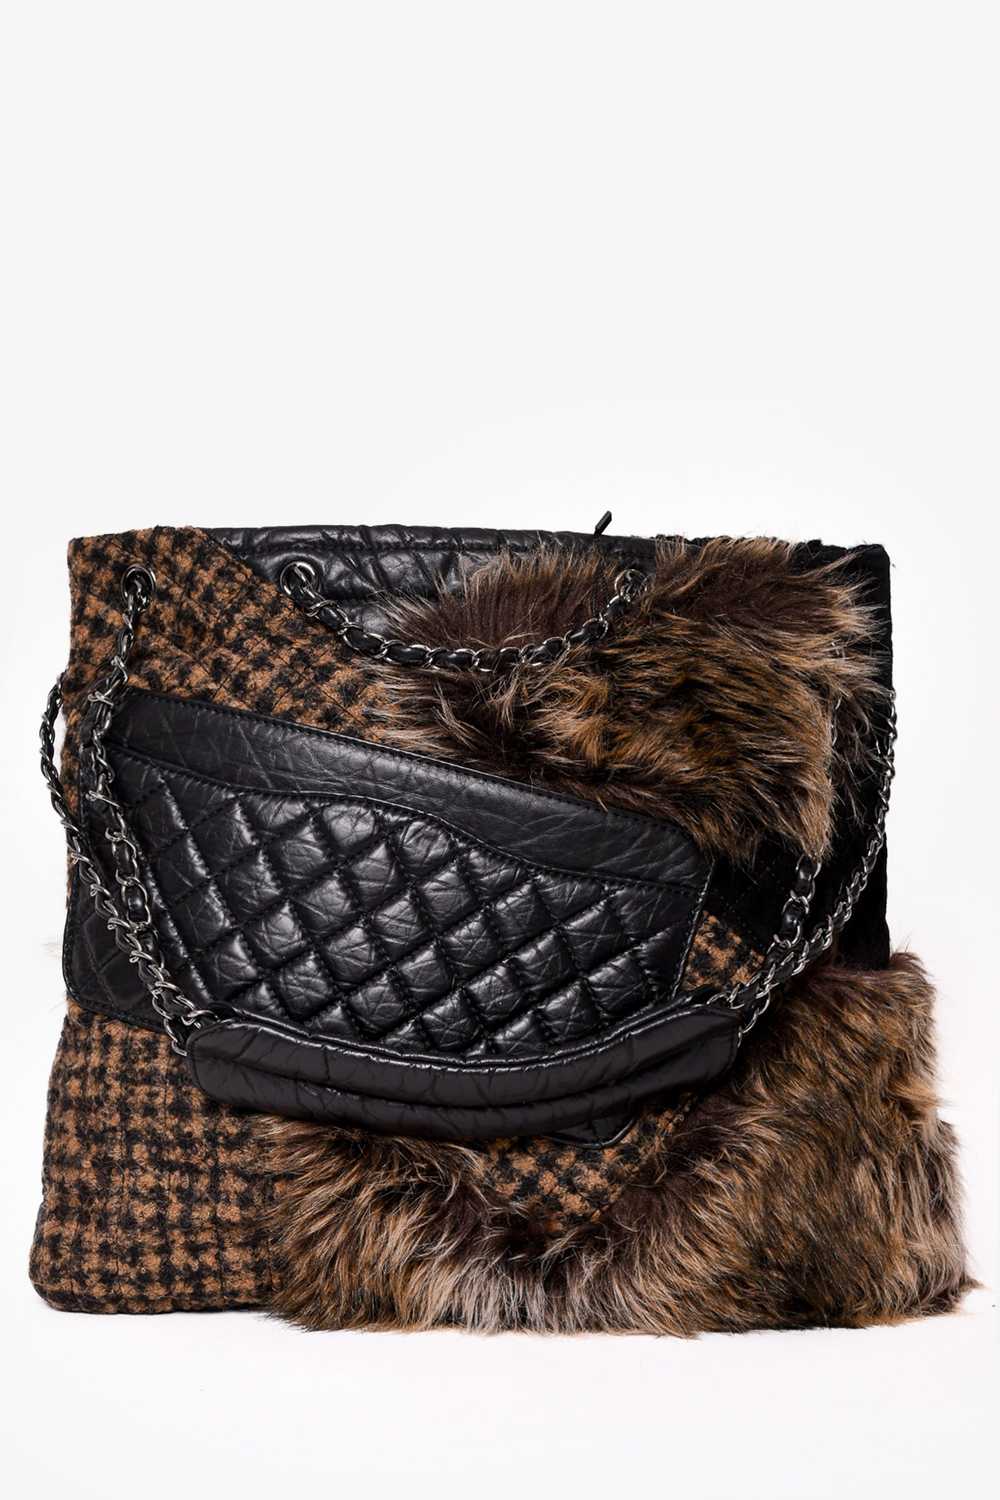 Pre-loved Chanel™ 2009-2010 Leather/Faux Fur Fant… - image 7